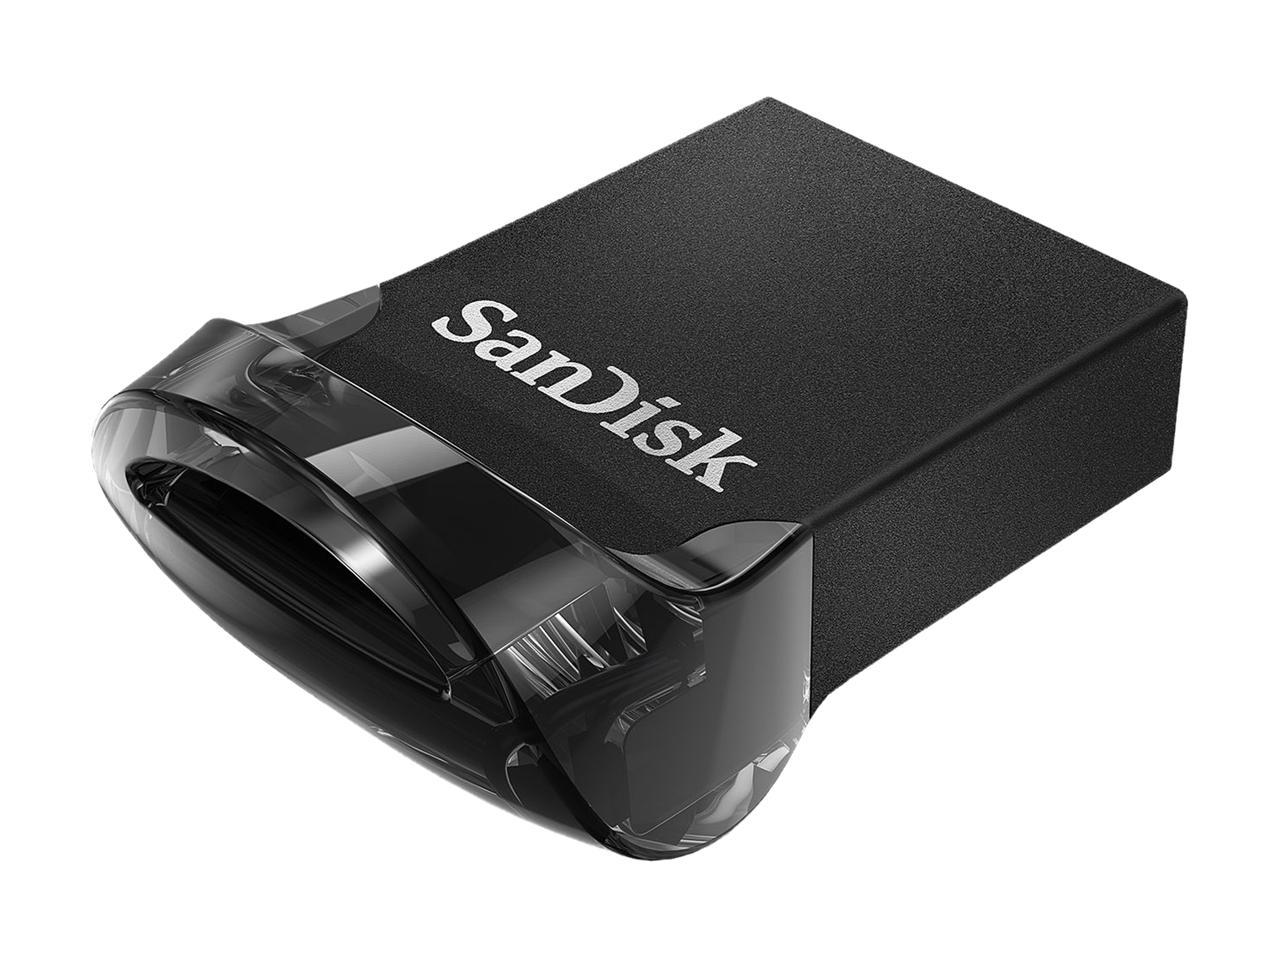 Sandisk 128Gb Ultra Fit Usb 3.1 Flash Drive, Speed Up To 130Mb/S (Sdcz430-128G-G46)